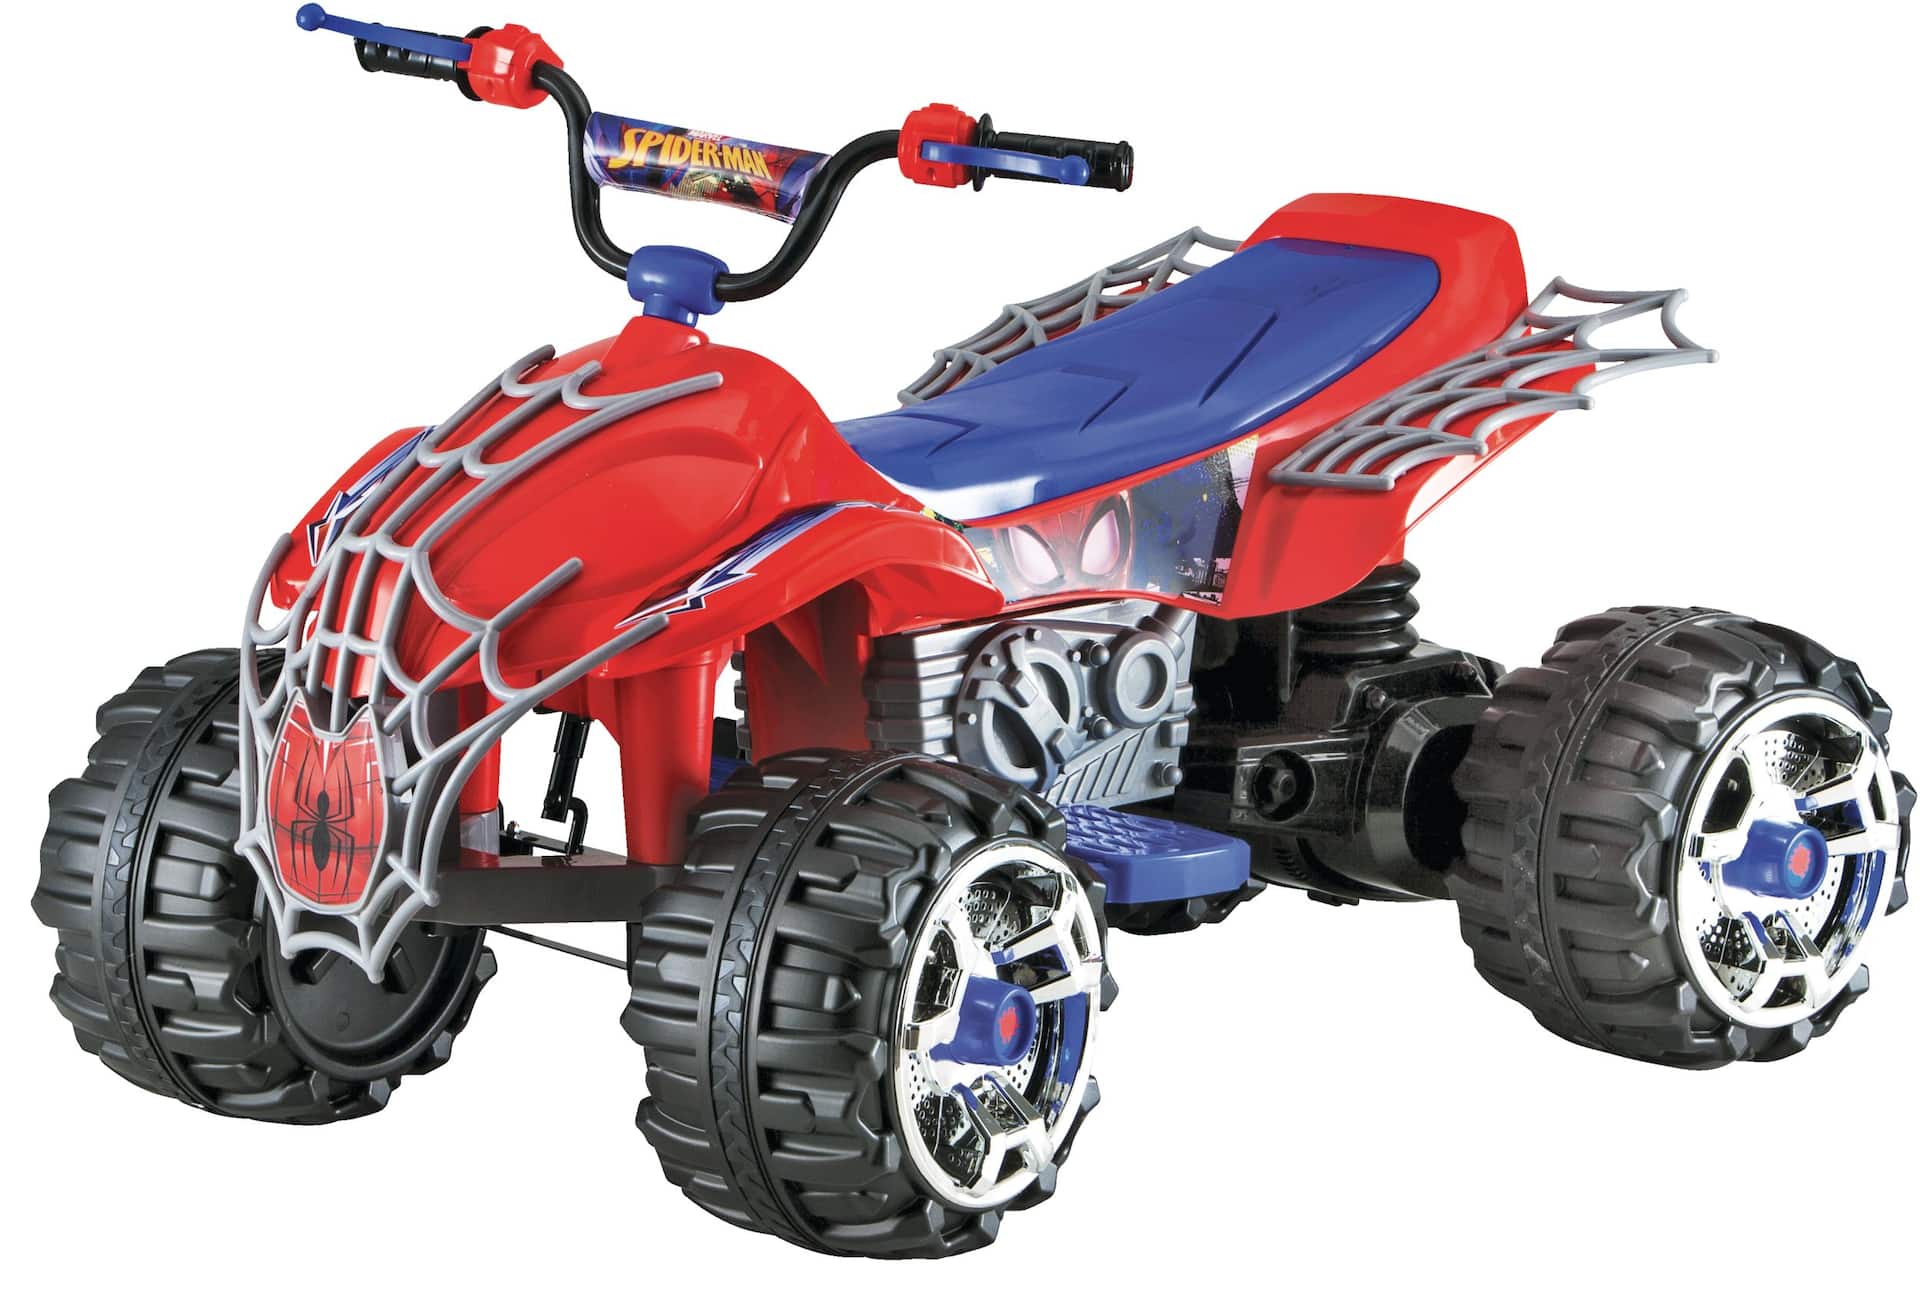 https://media-www.canadiantire.ca/product/playing/cycling/wheeled-goods/1840086/12v-spider-man-atv-ride-on-7335a321-c793-401b-83a5-2b77c41756f2-jpgrendition.jpg